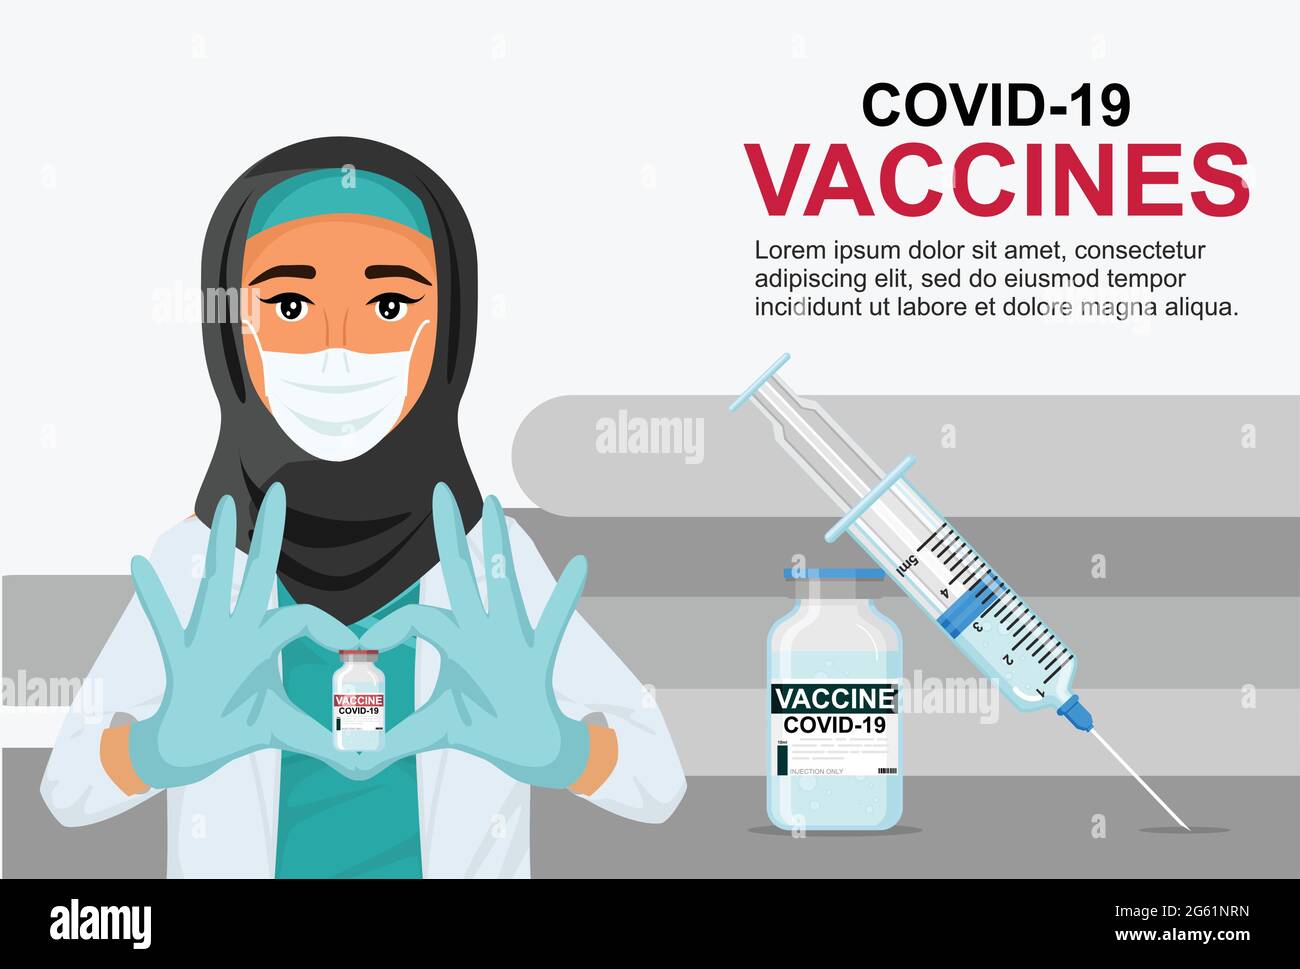 Muslim woman doctor Stock Vector Images - Alamy